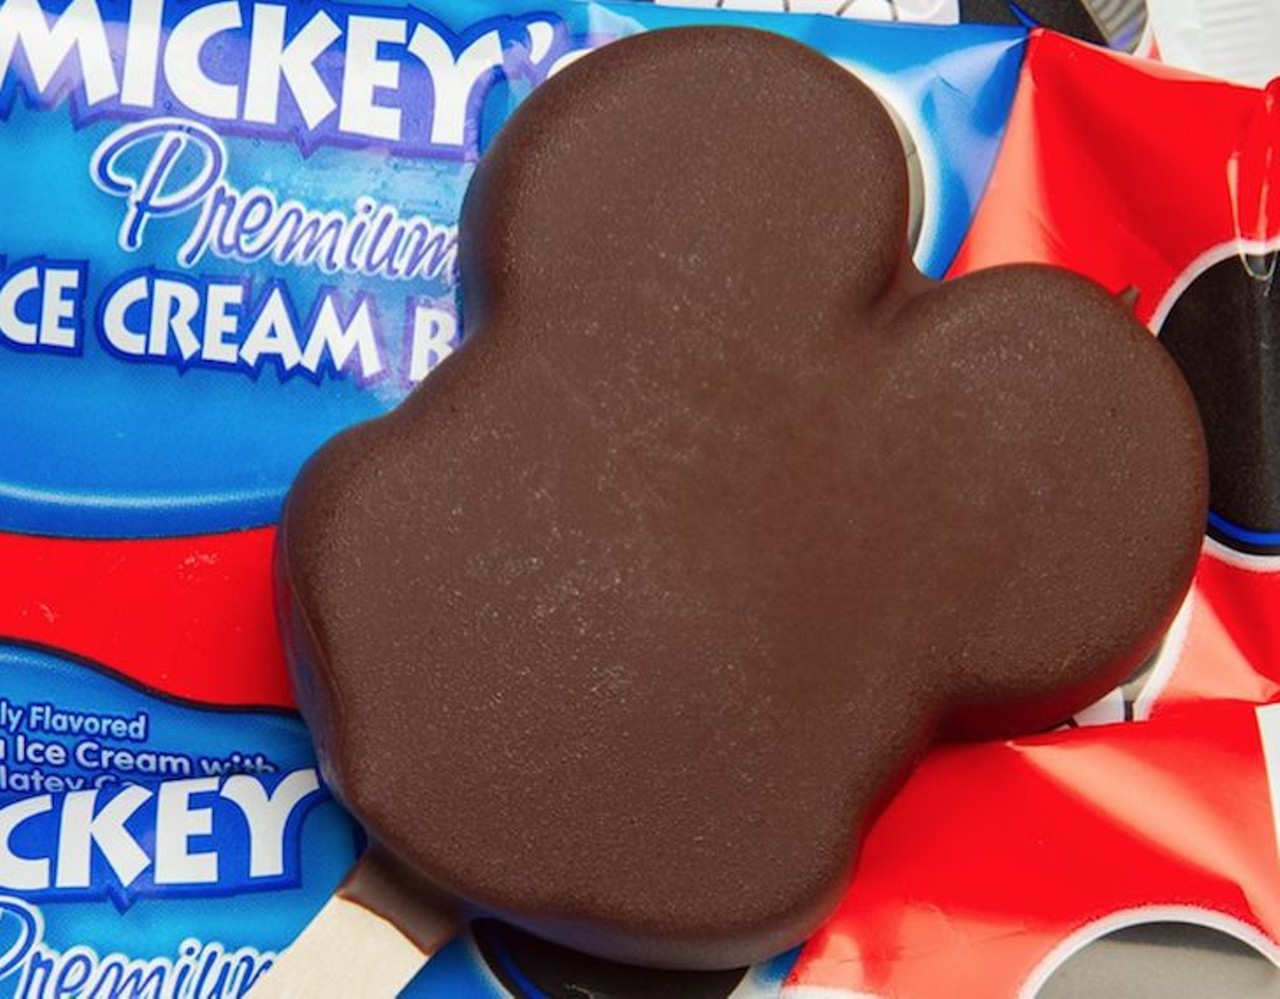 Disney
Mickey Mouse ice cream bar
As if ice cream could get any better, the vanilla flavor wrapped in milk chocolate now comes with Mickey Mouse-shaped ears.
Photo via Walt Disney World/Facebook